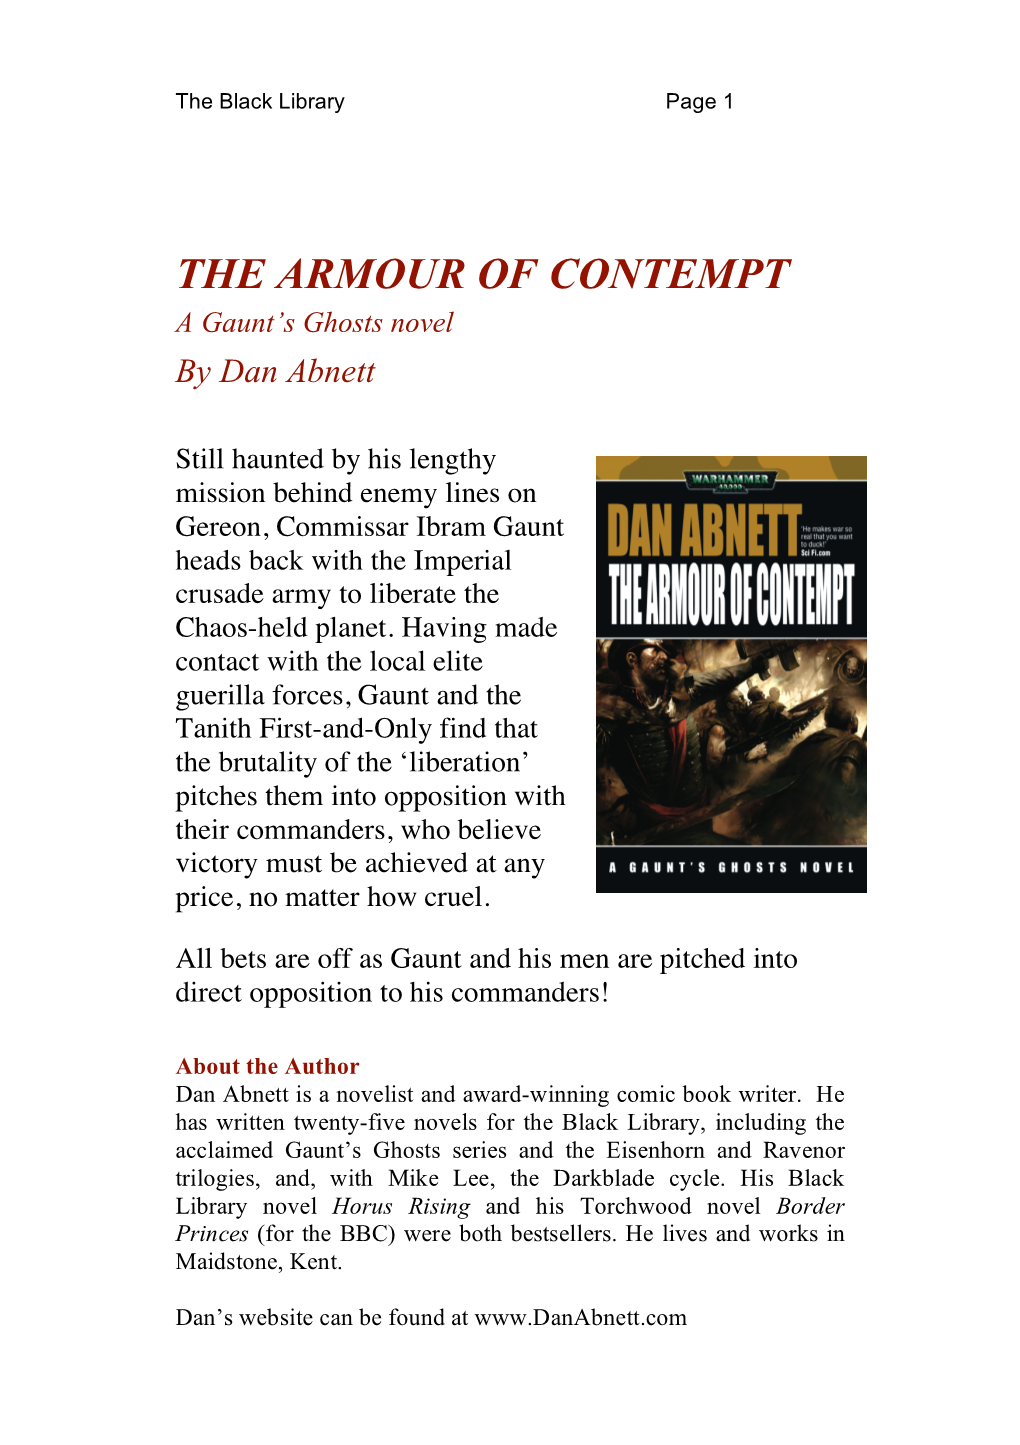 THE ARMOUR of CONTEMPT a Gaunt’S Ghosts Novel by Dan Abnett